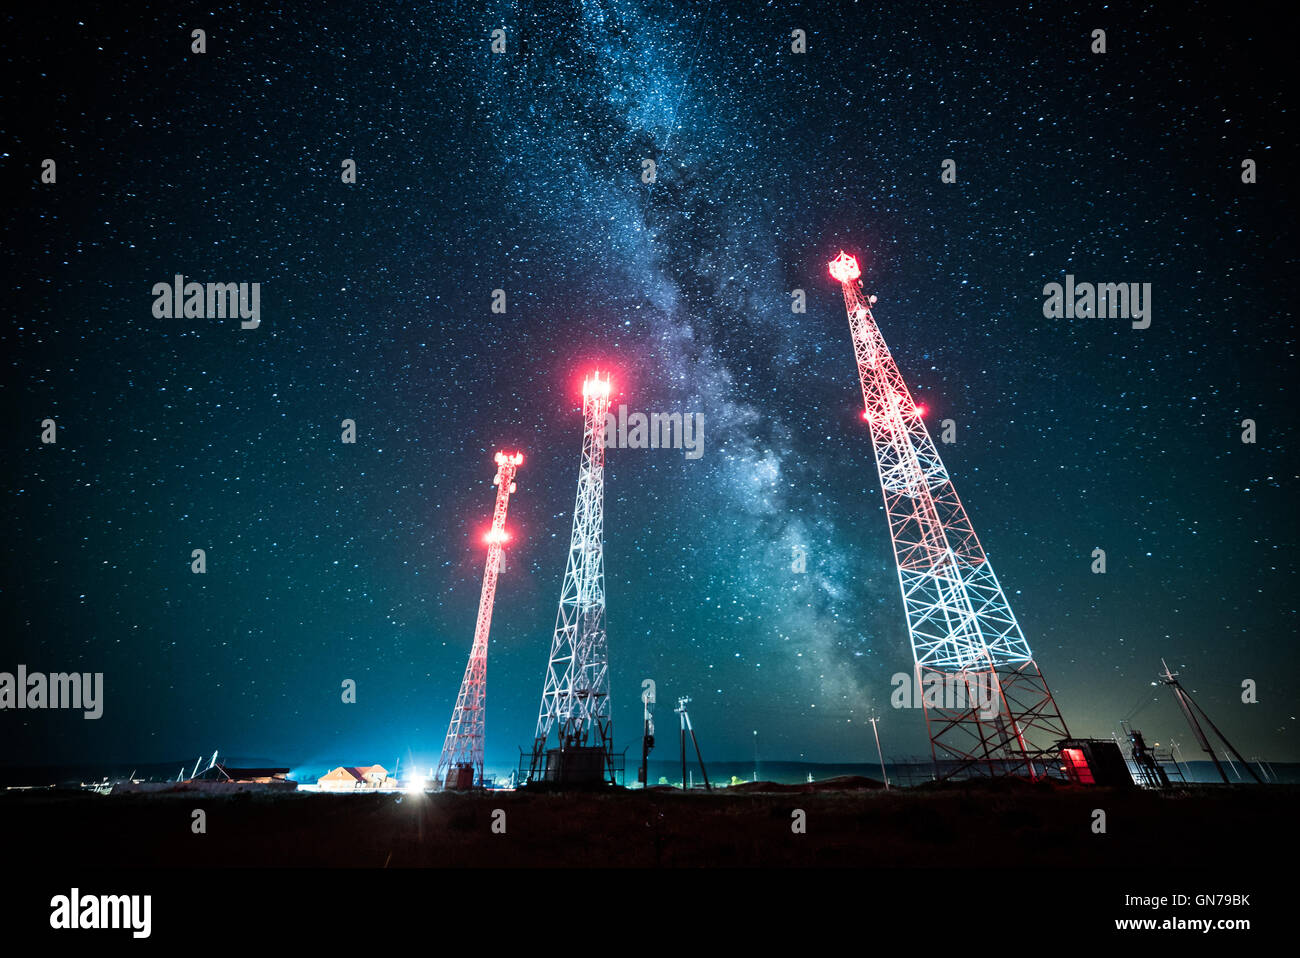 Power lines against night sky and milky way galaxy Stock Photo